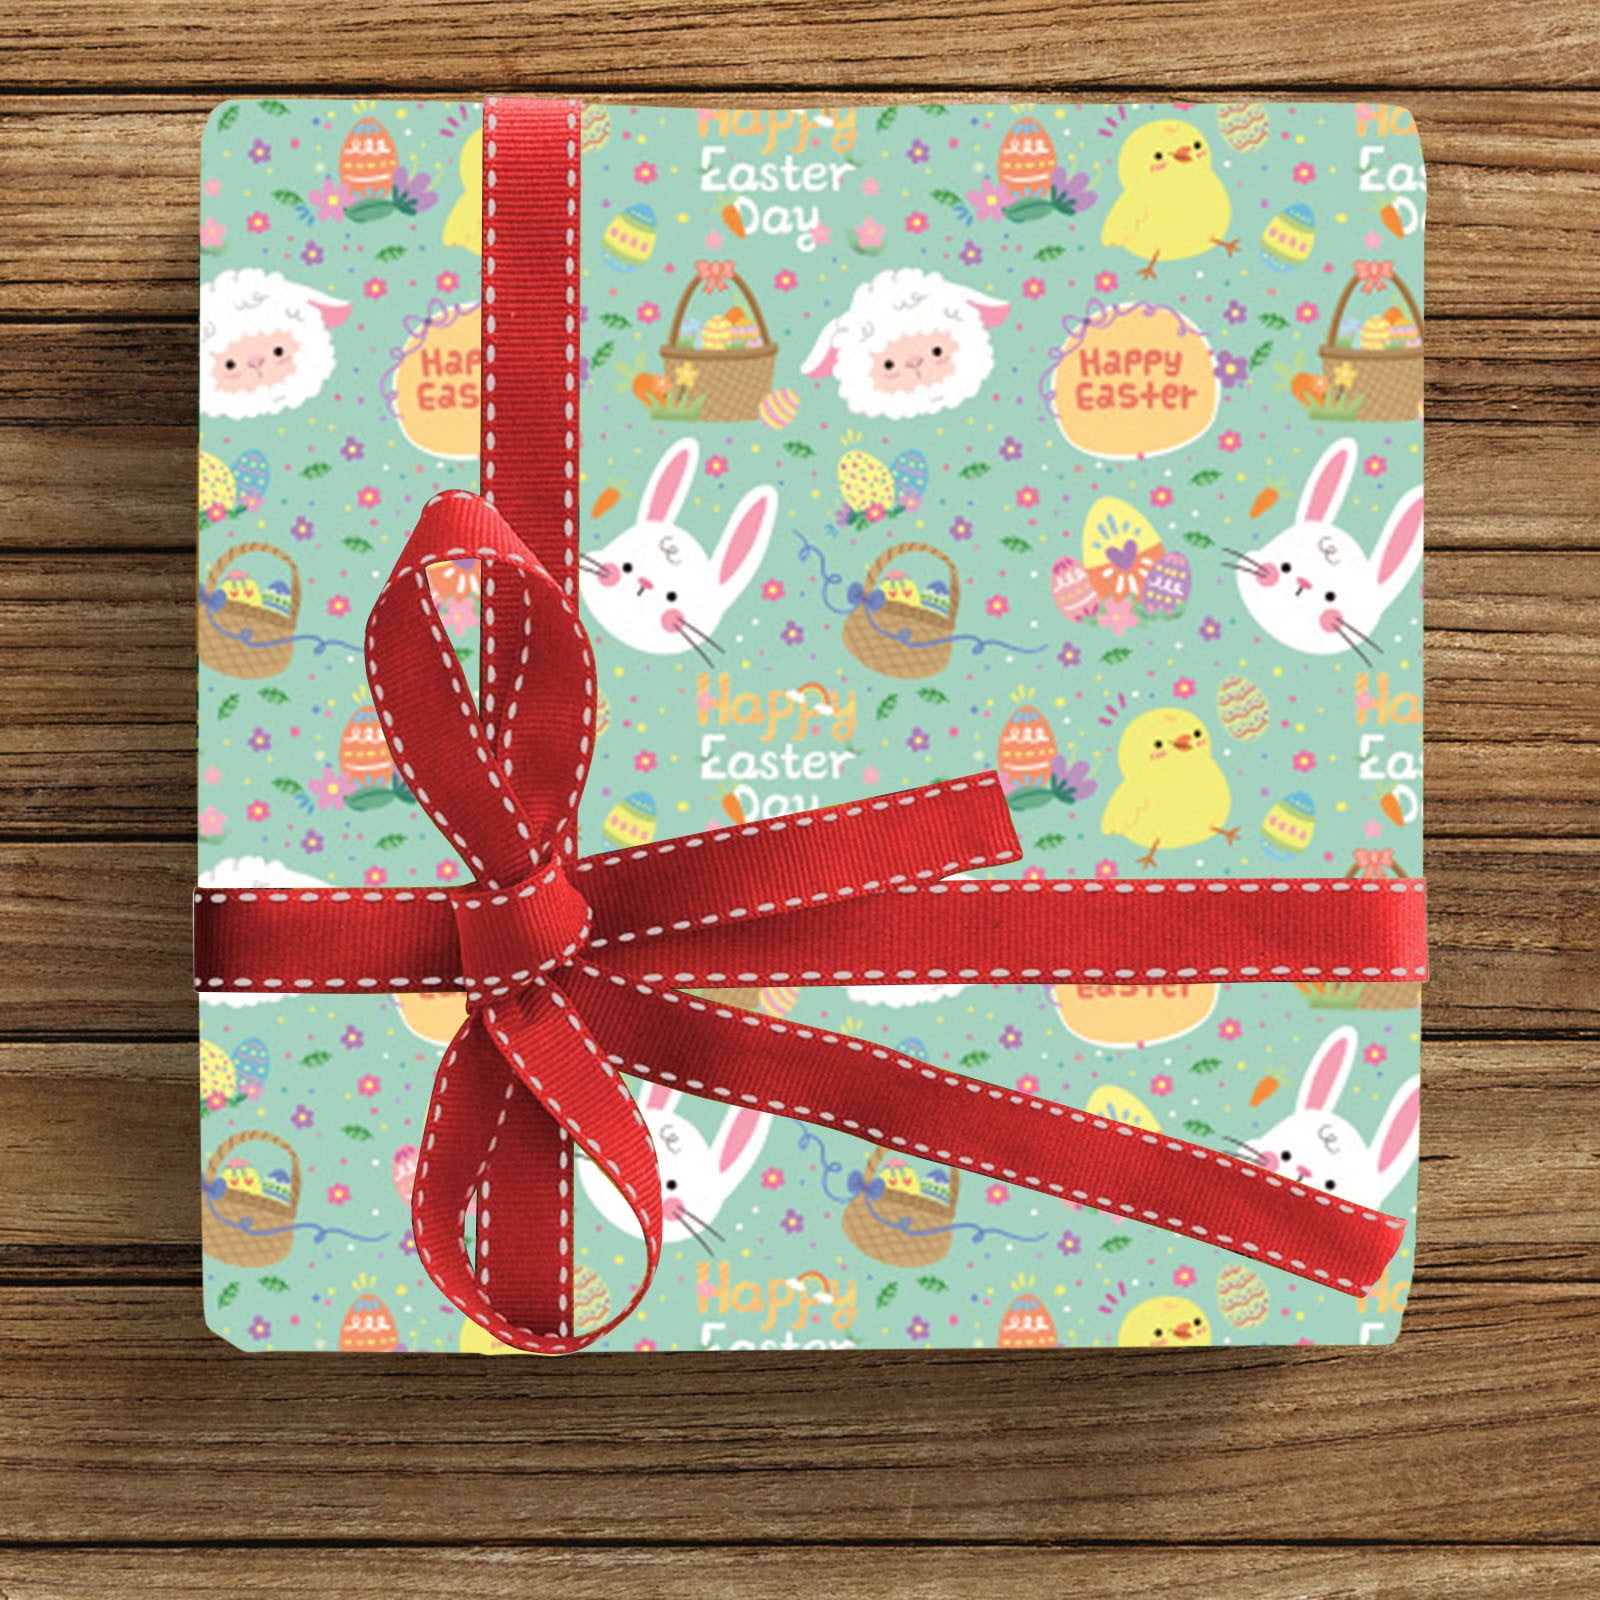 Happy Easter Wrapping paper,Stunning Pink Cute Easter Bunny Gift  Wrap,Easter Gift Wrap,Bunny Wrapping Paper